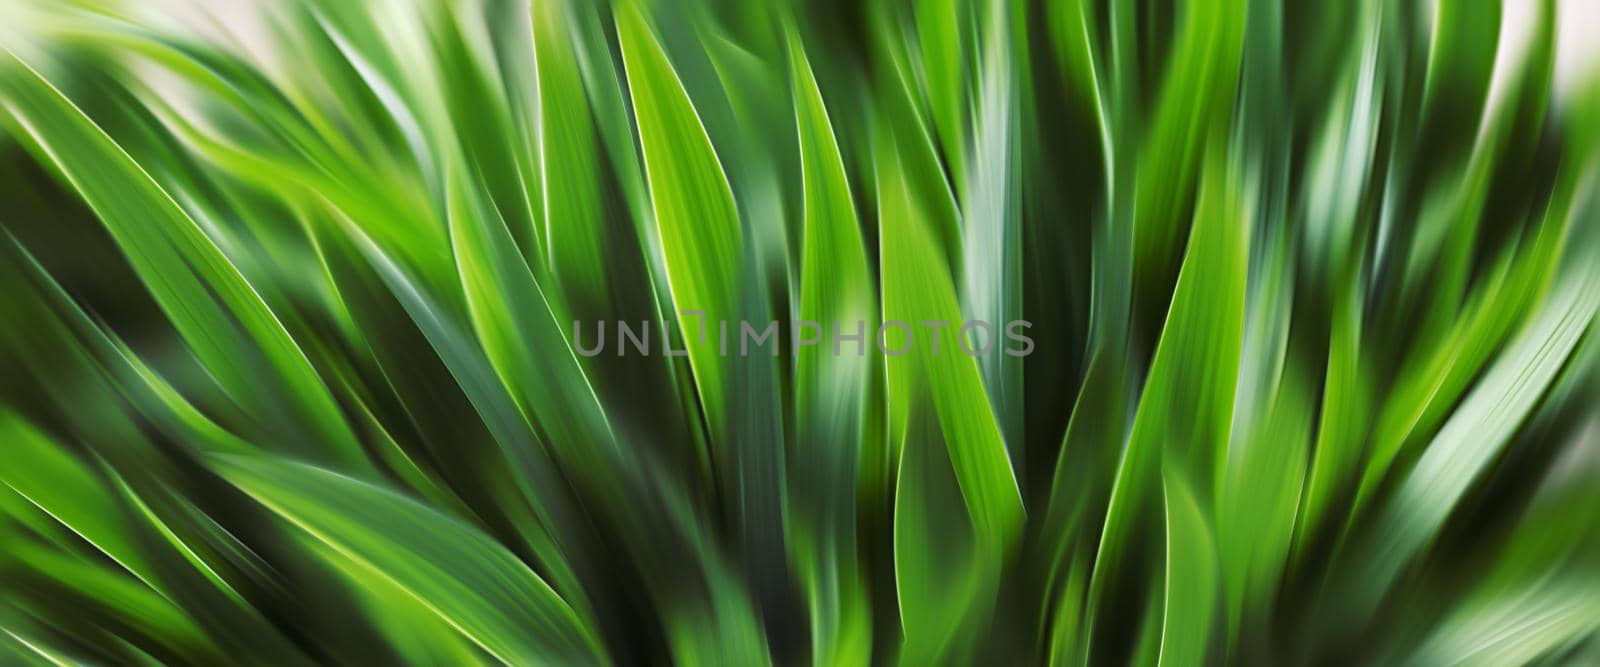 Abstract blurred green grass. Bright green grass background